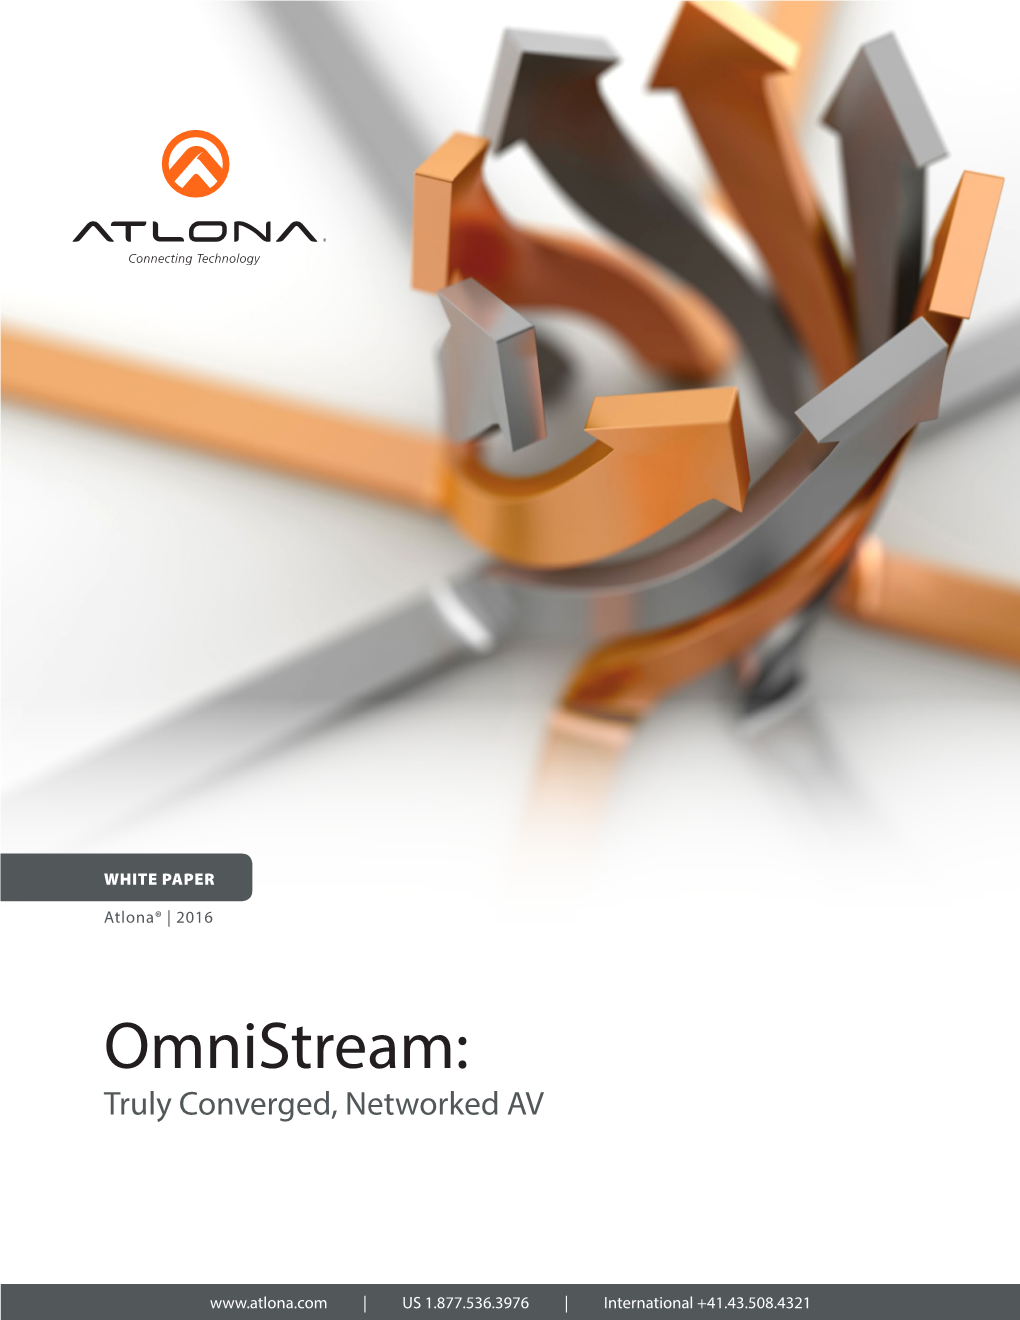 Omnistream: Truly Converged, Networked AV